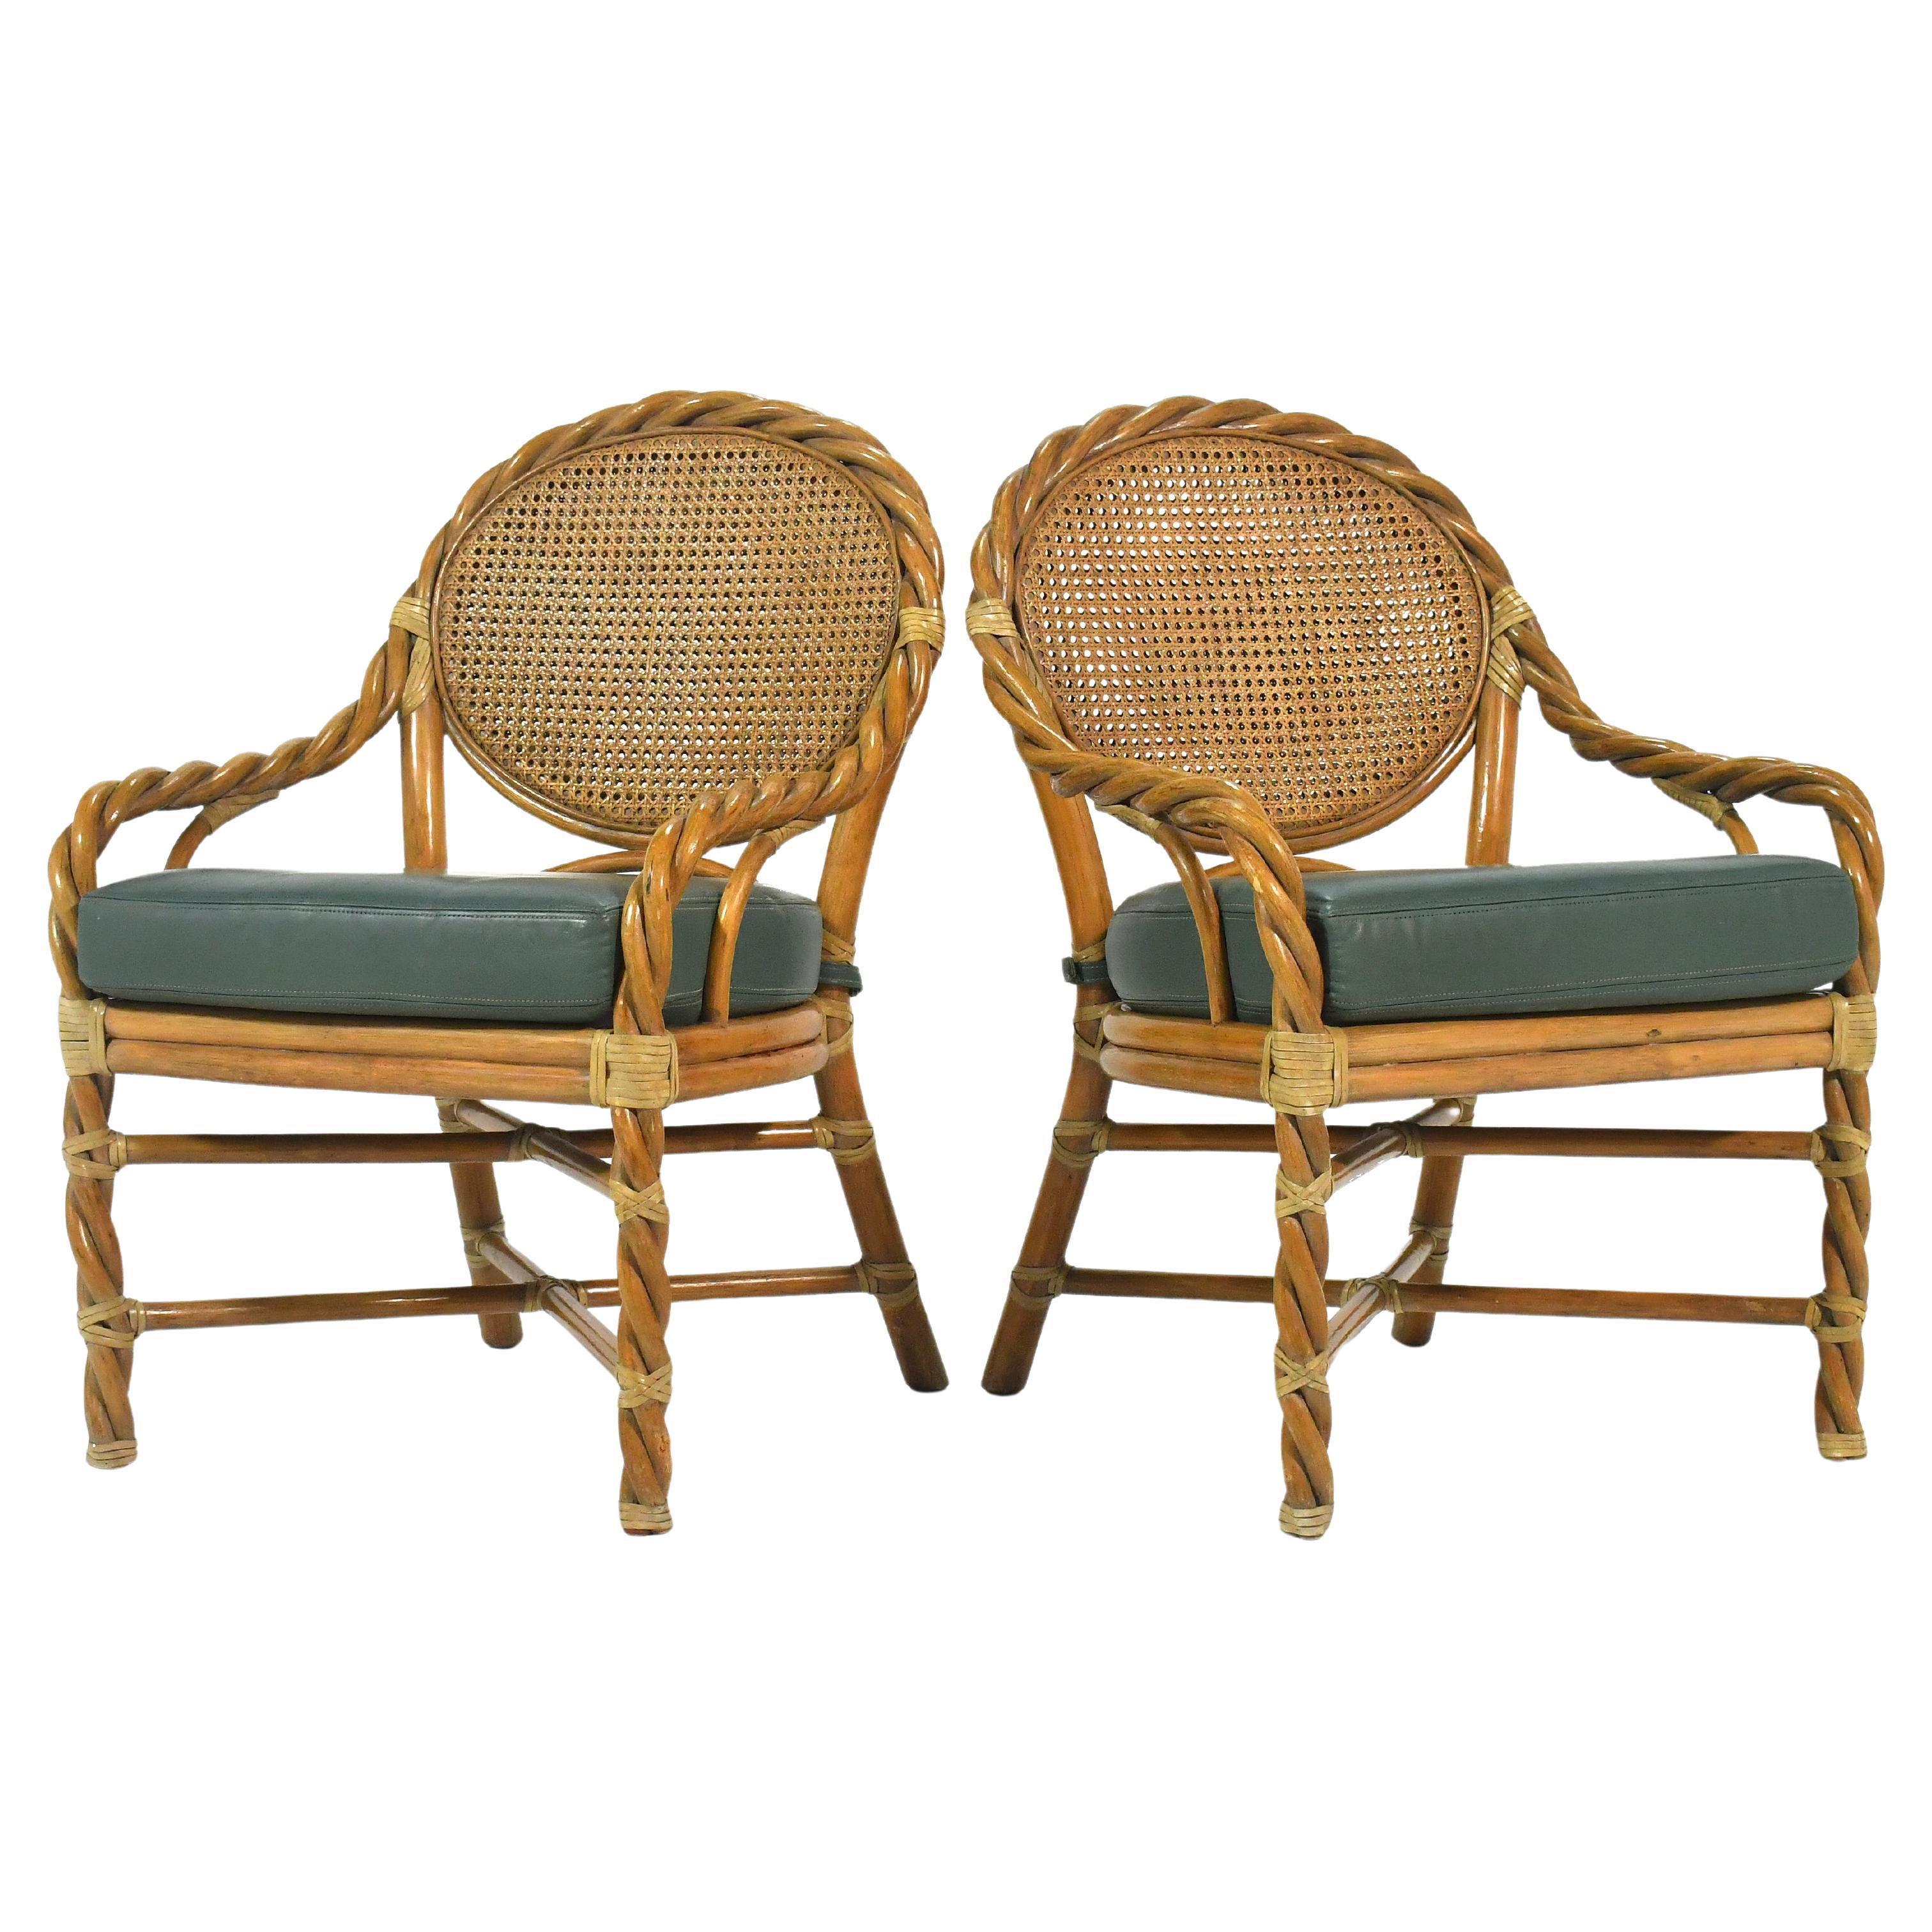 Pair of McGuire Rattan Lounge Chairs